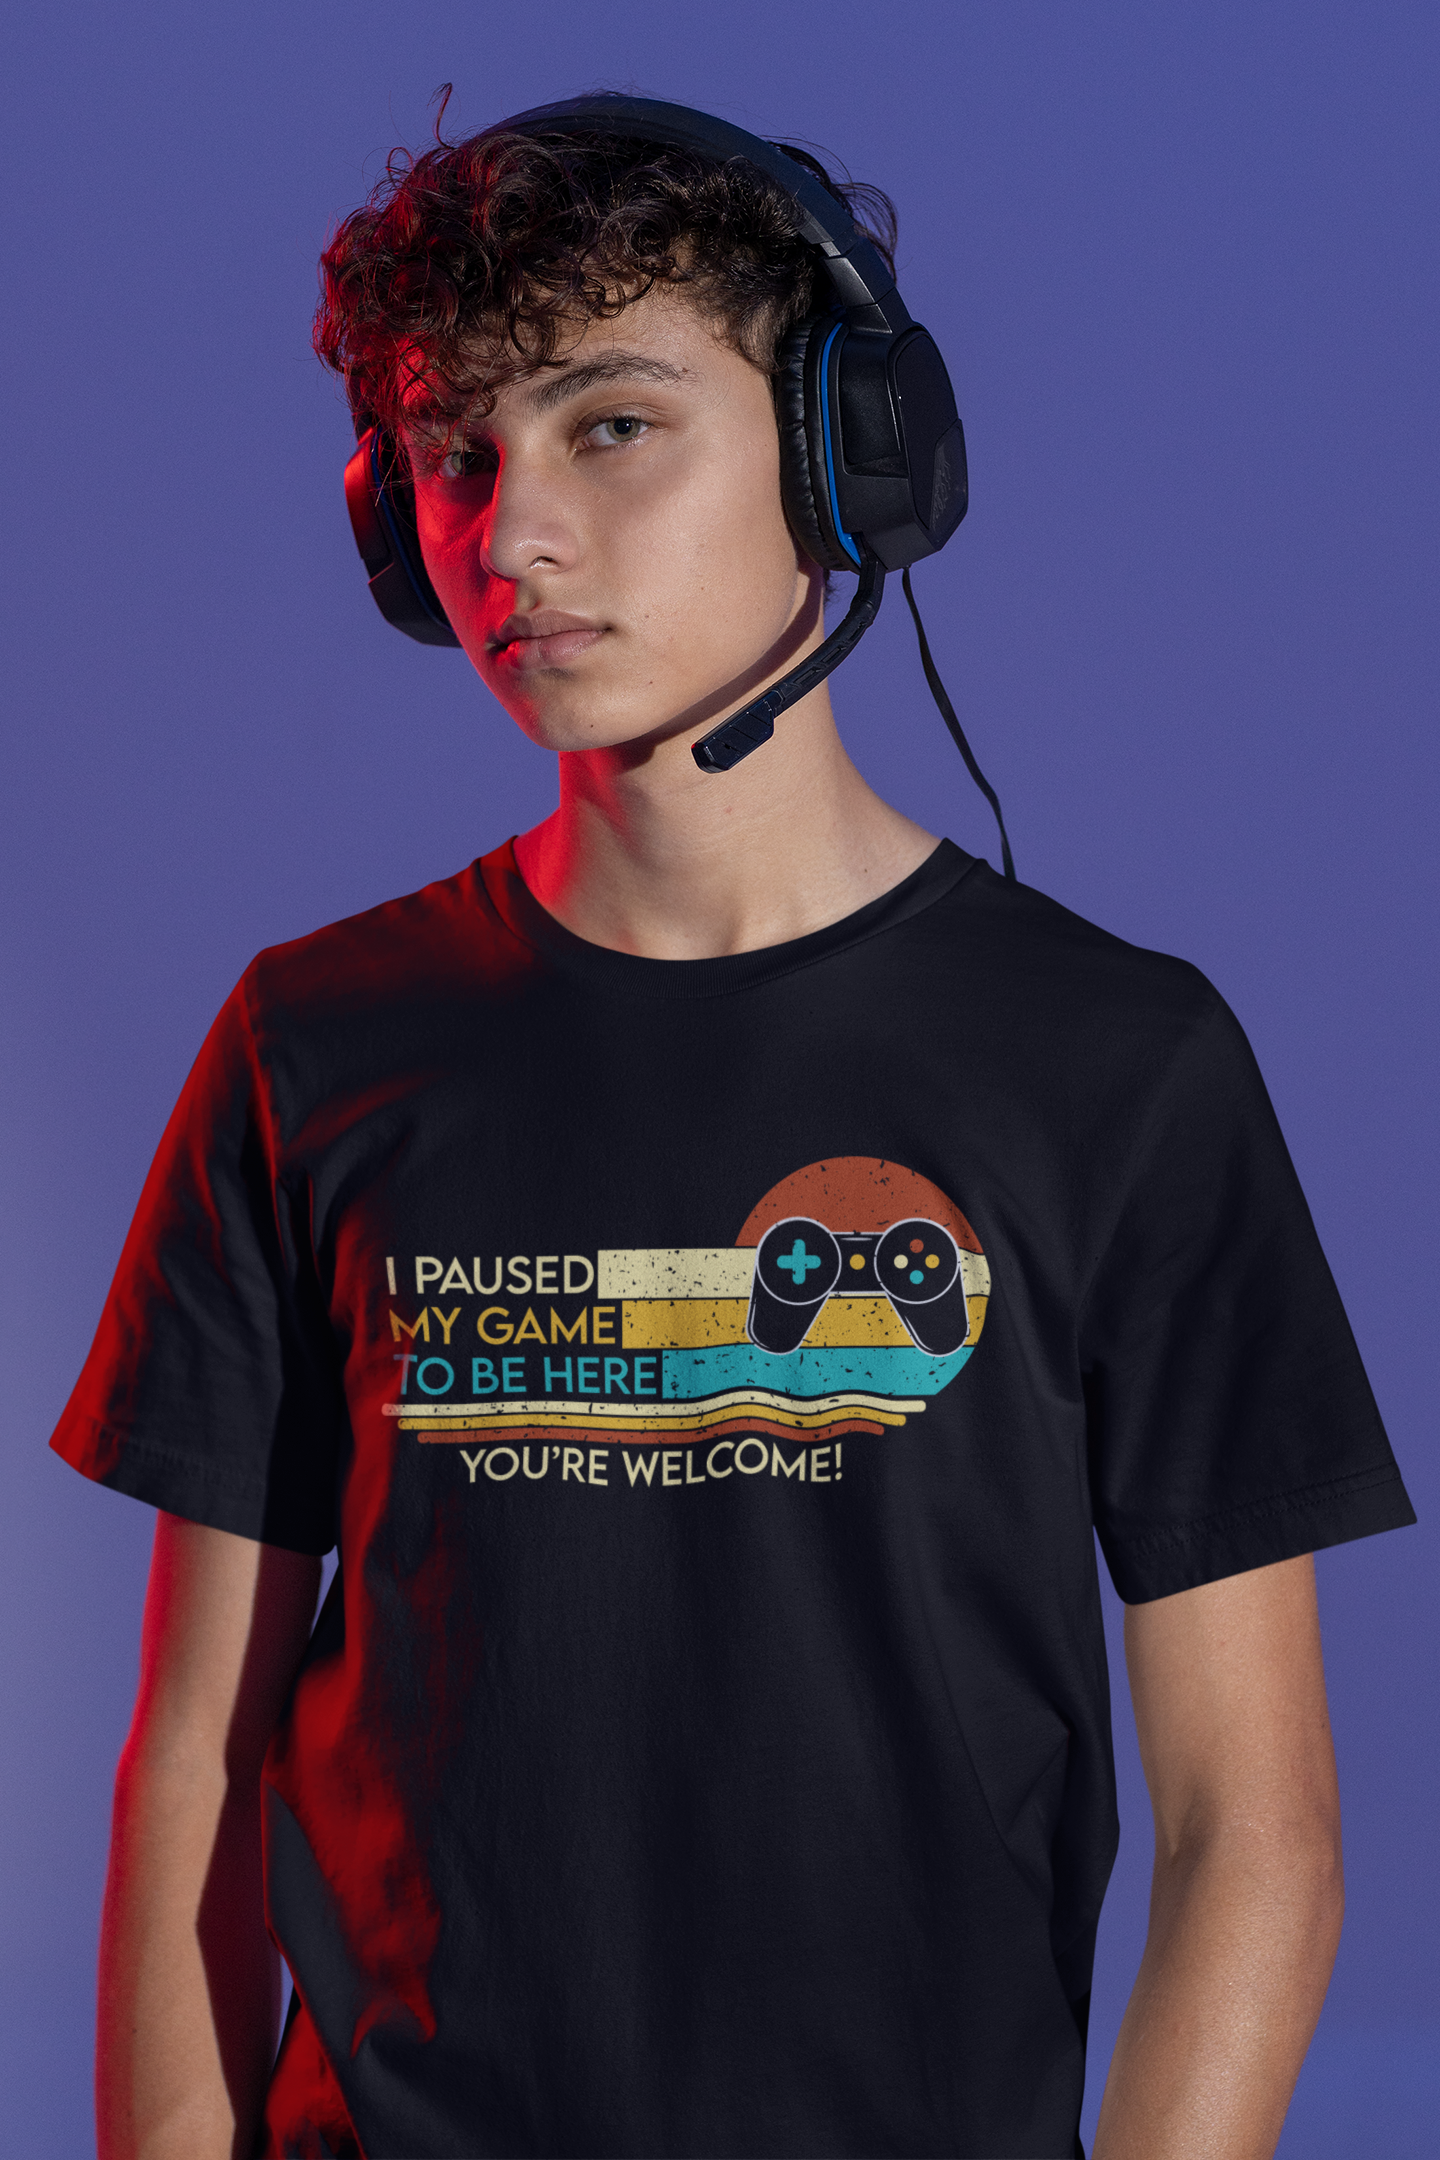 I Paused My Game To Be Here Black Round Neck T-Shirt for Men